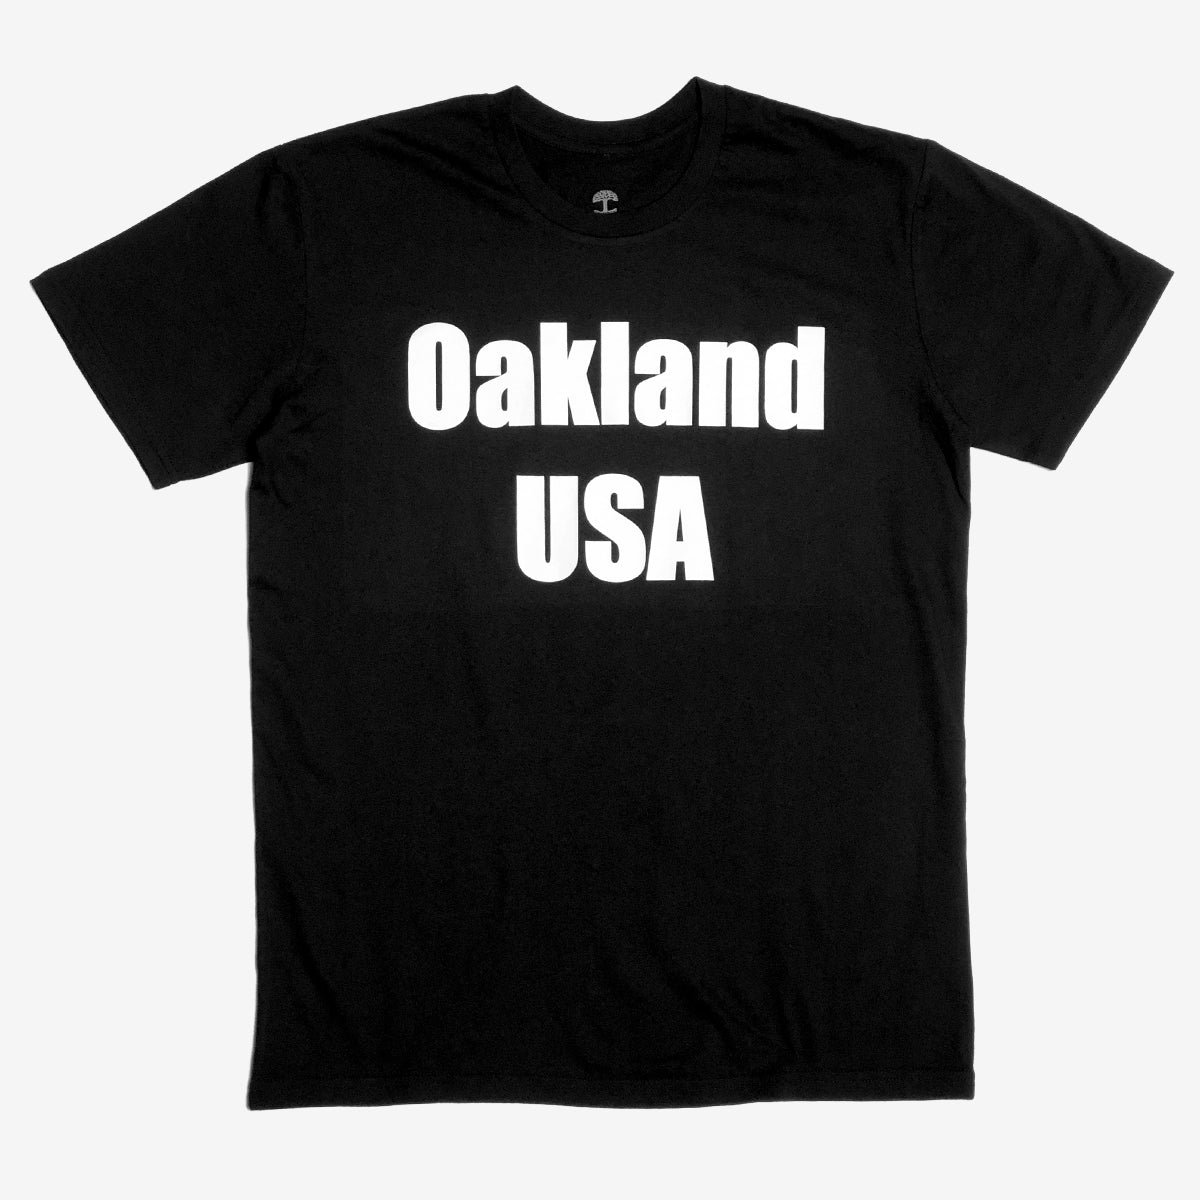 A black t-shirt with a large white Oakland USA wordmark logo on the chest.